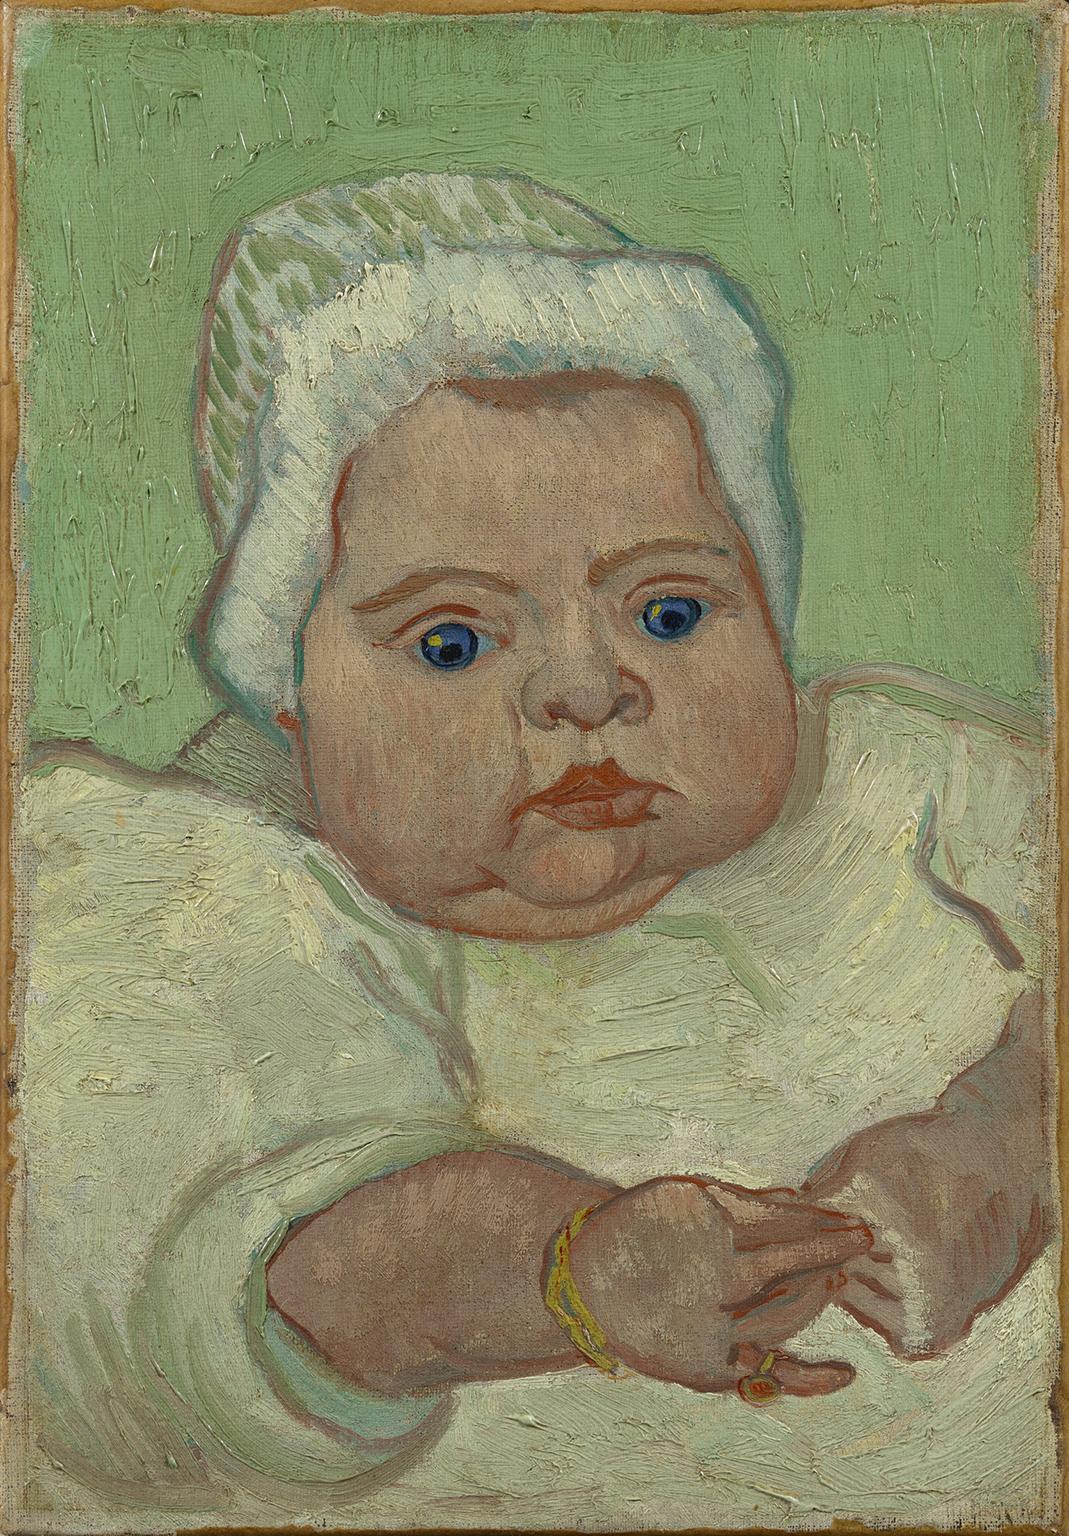 Portrait of a young boy, Marcelle Roulin by Vincent van Gogh